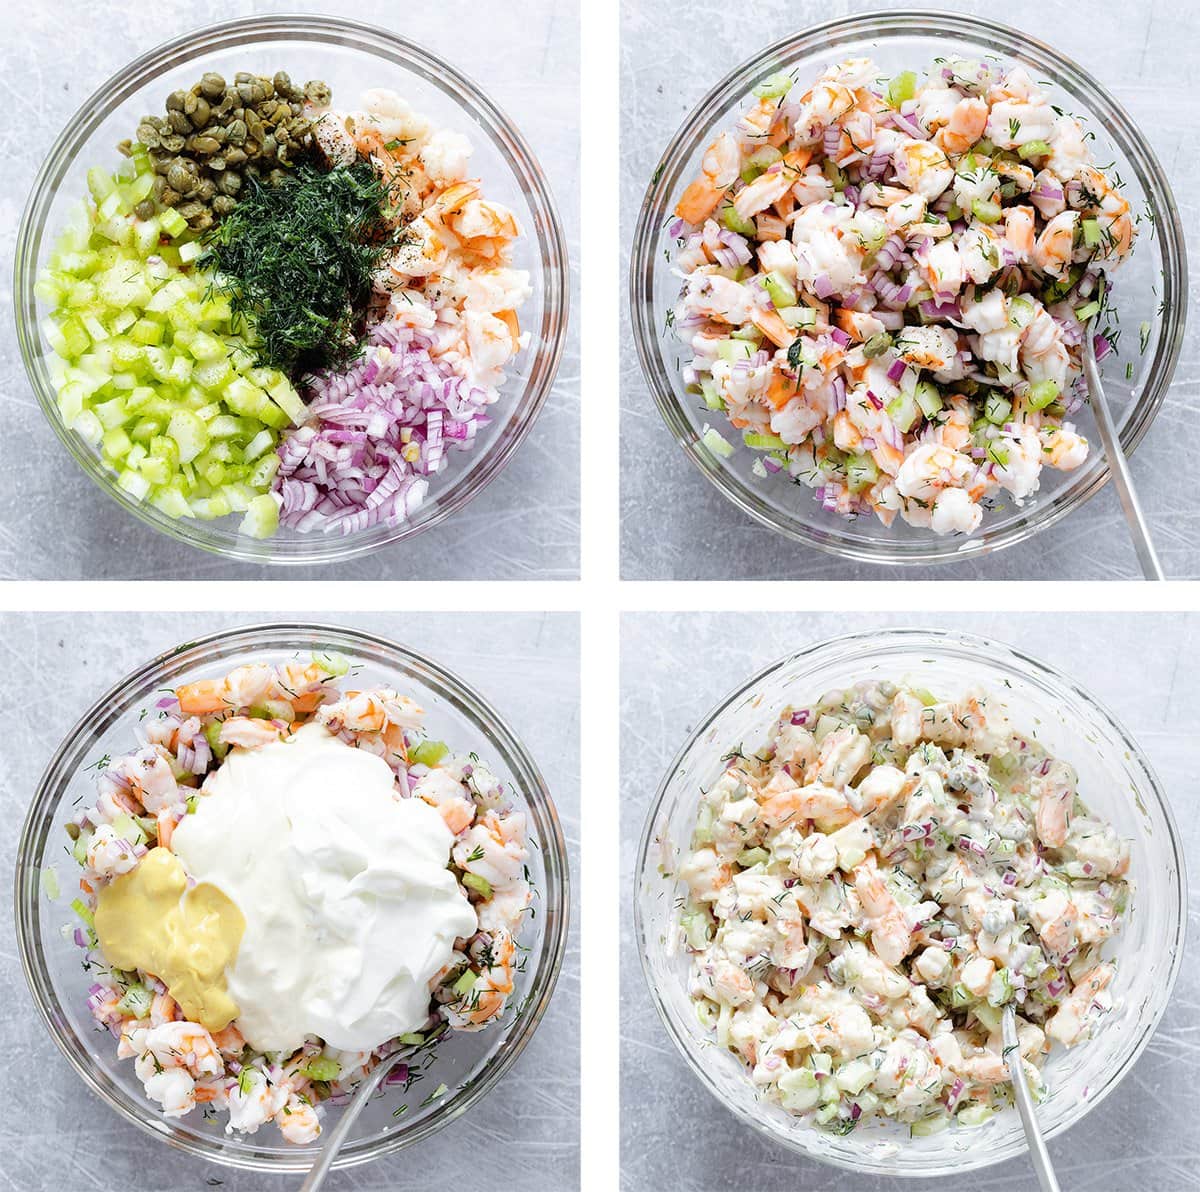 Four photos of shrimp salad being mixed together in a large glass bowl, before and mixing chopped ingredients and adding mayo and yogurt.